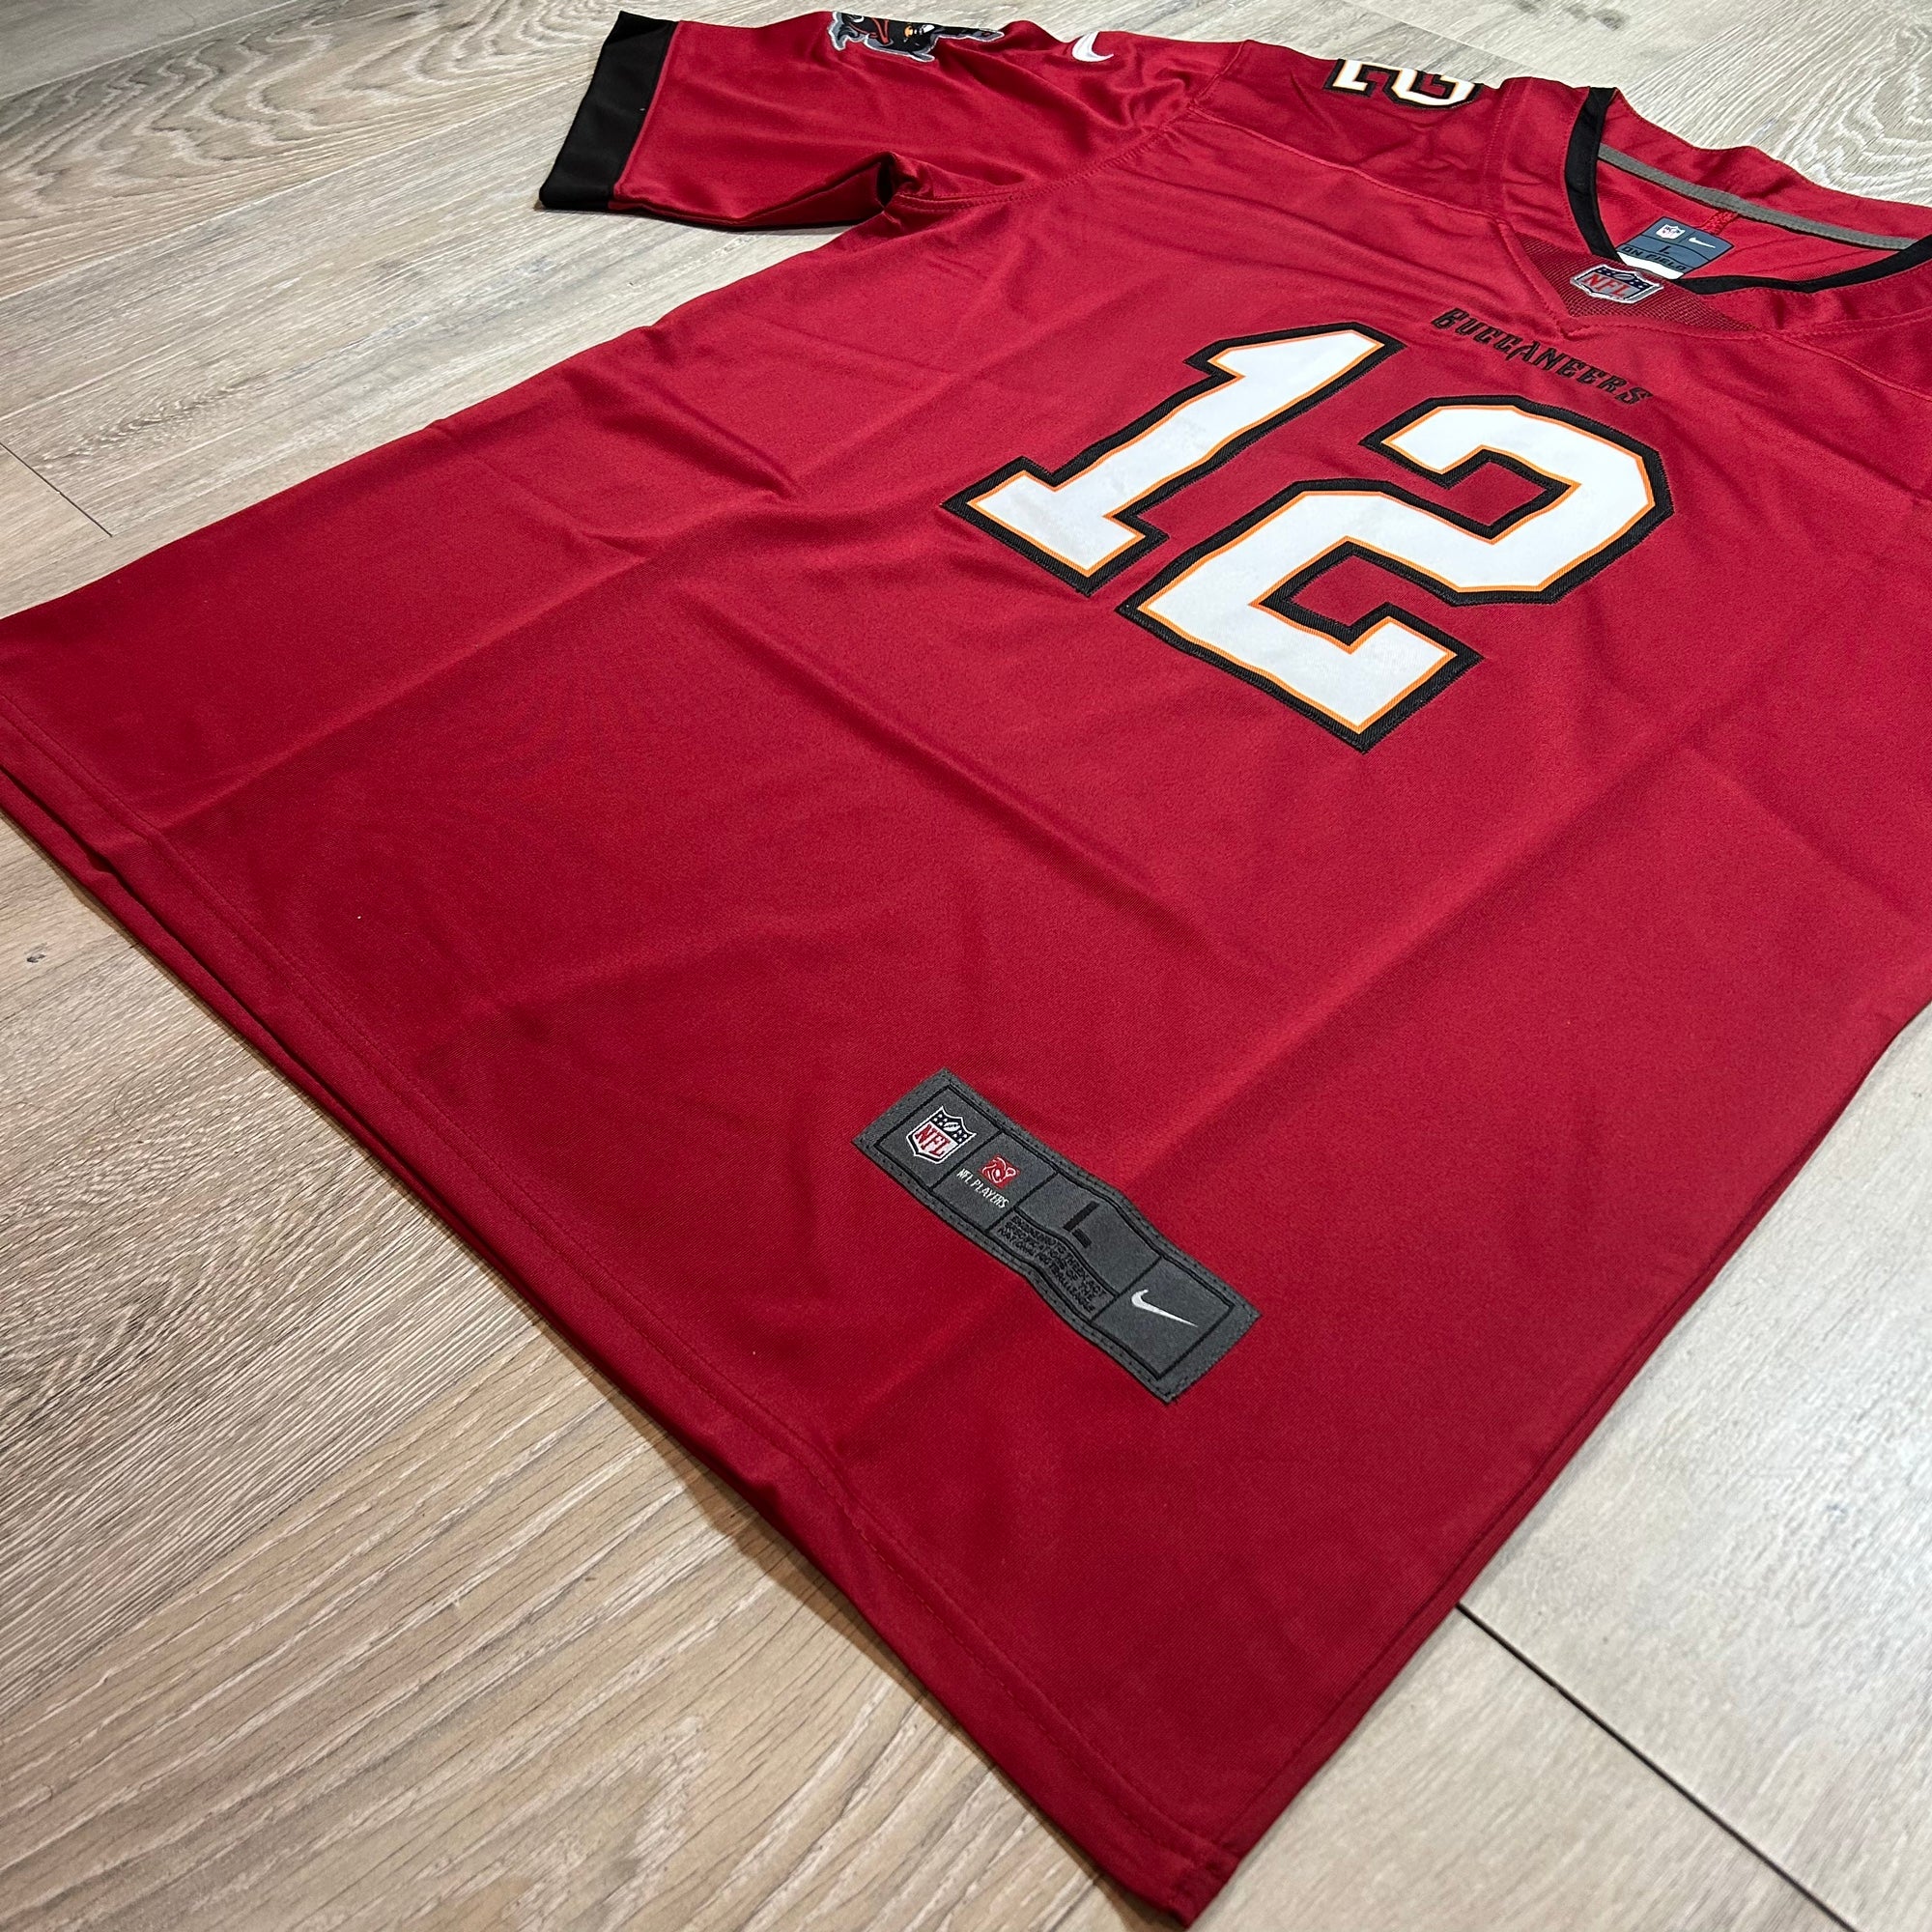 Tampa Bay Buccaneers red jersey